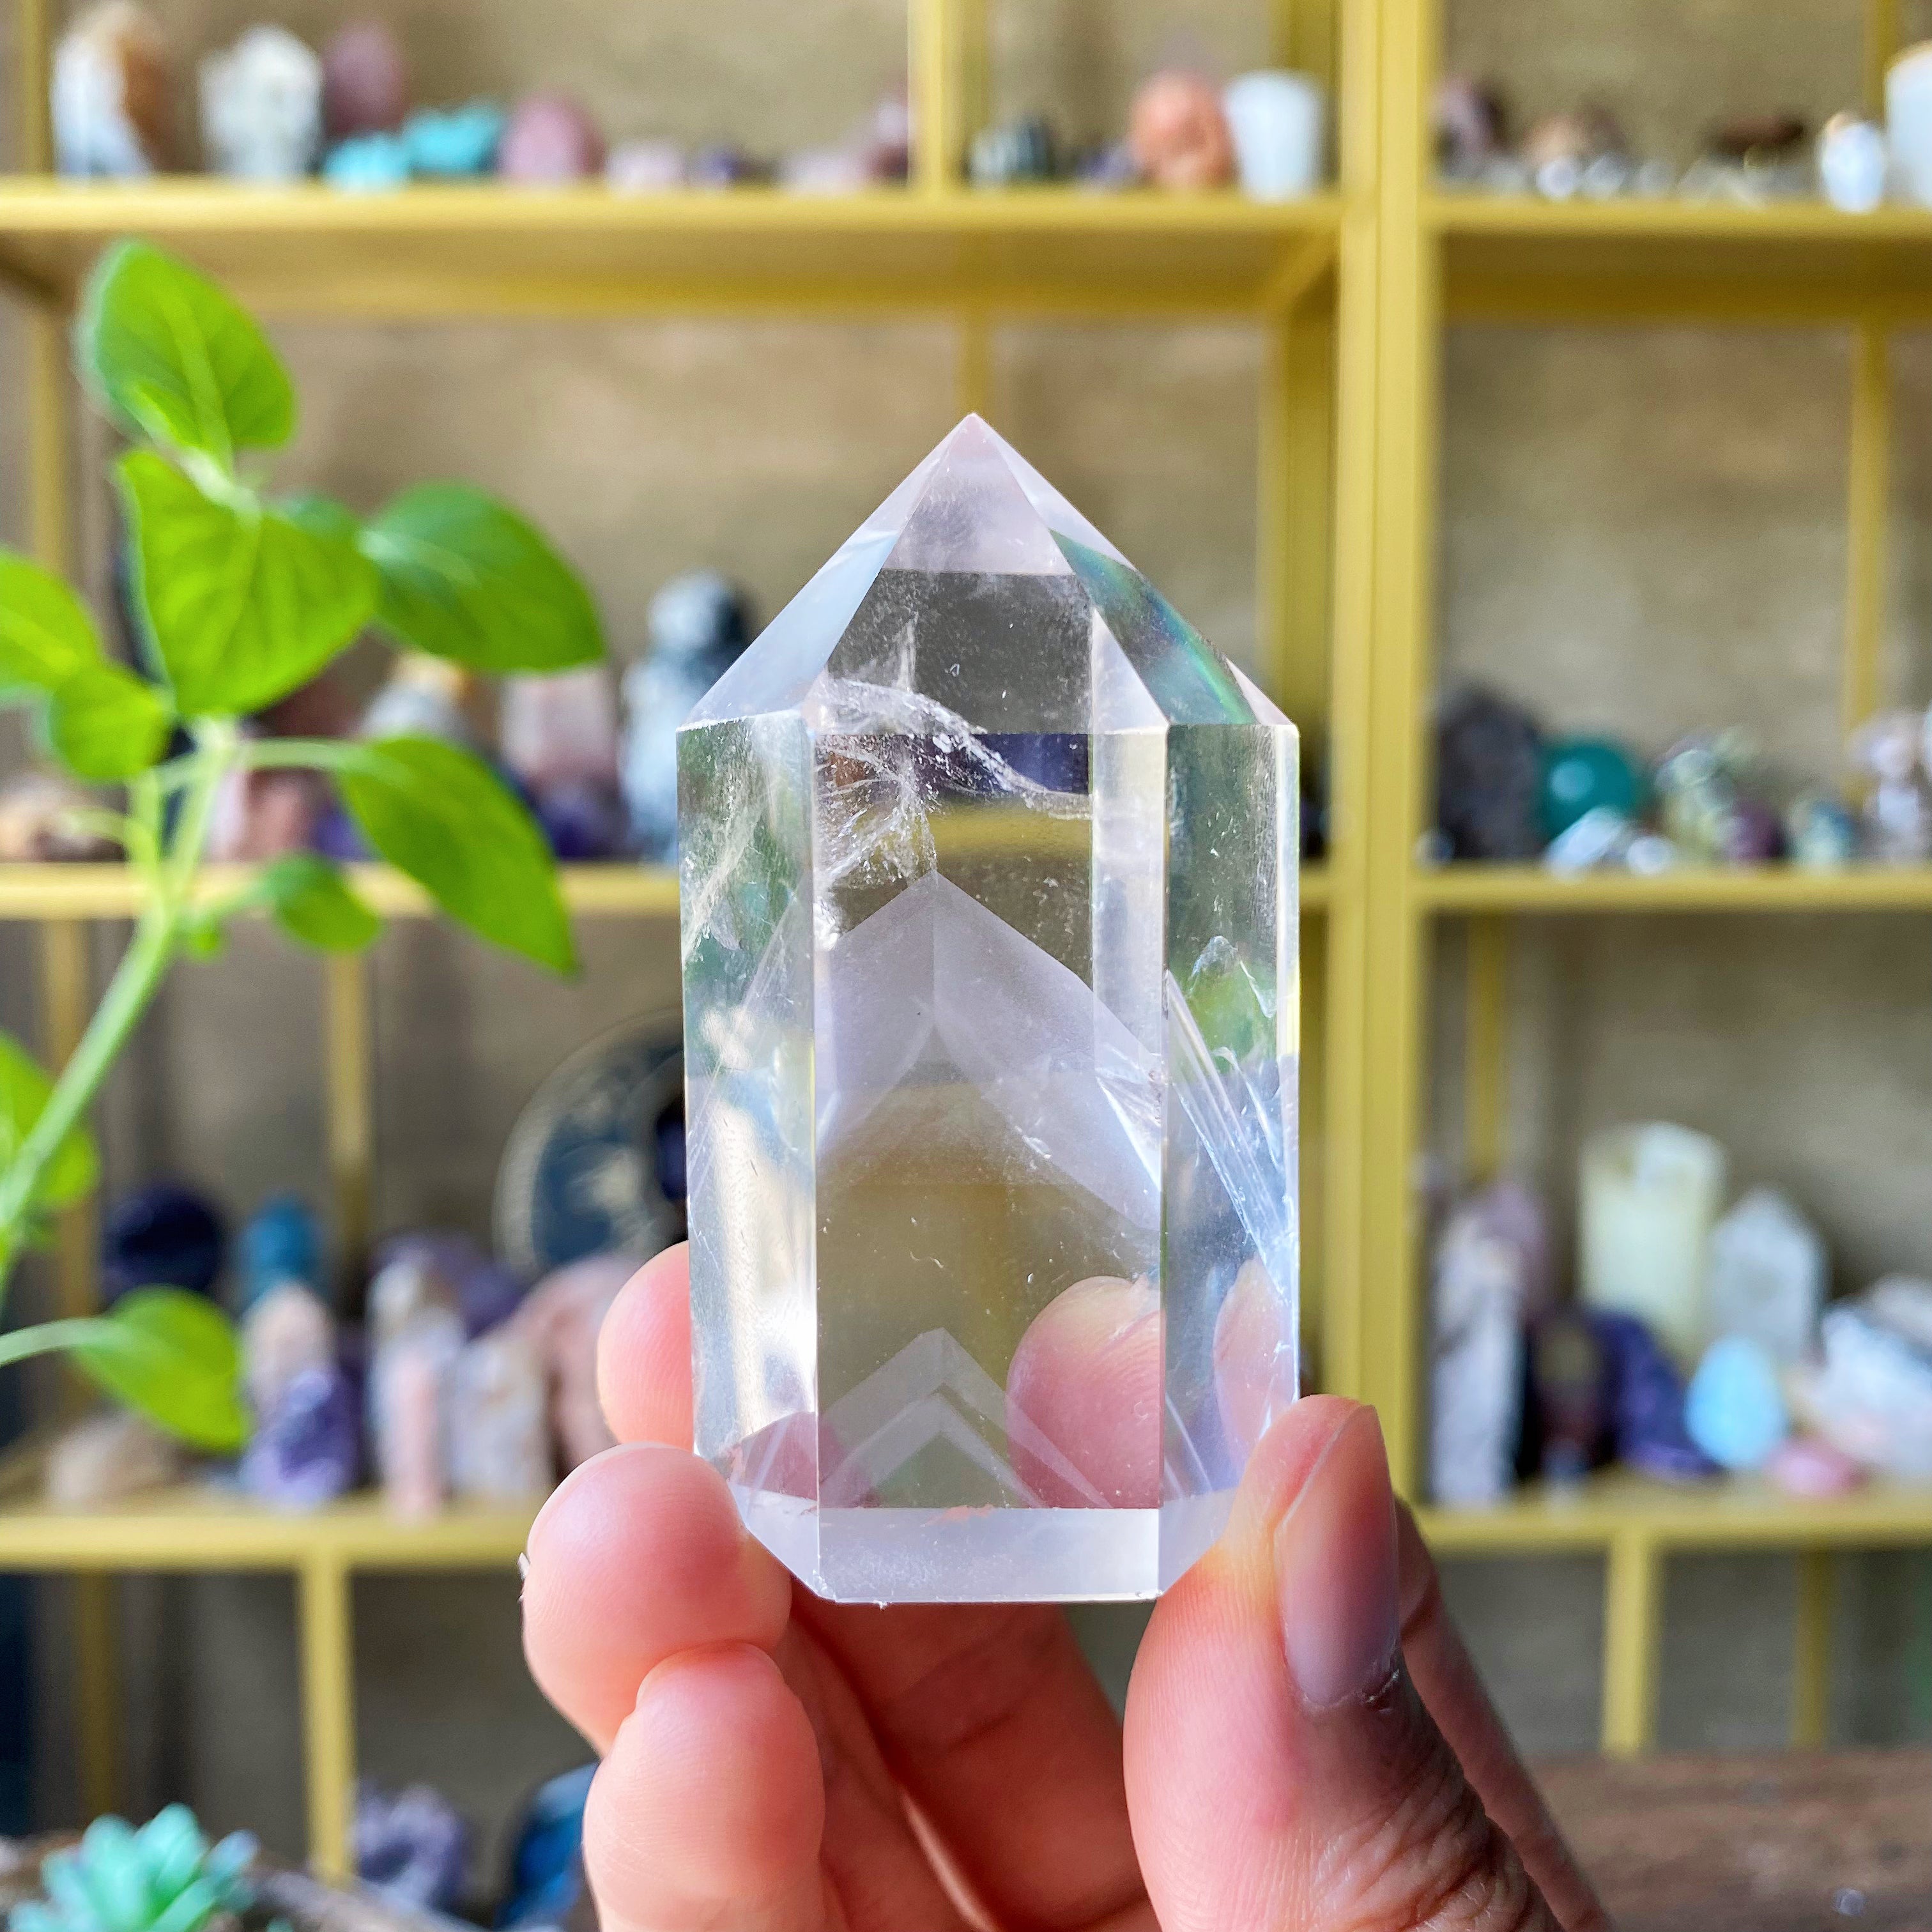 【Weekly Flash Deals】Clear Quartz With Pyramid Point